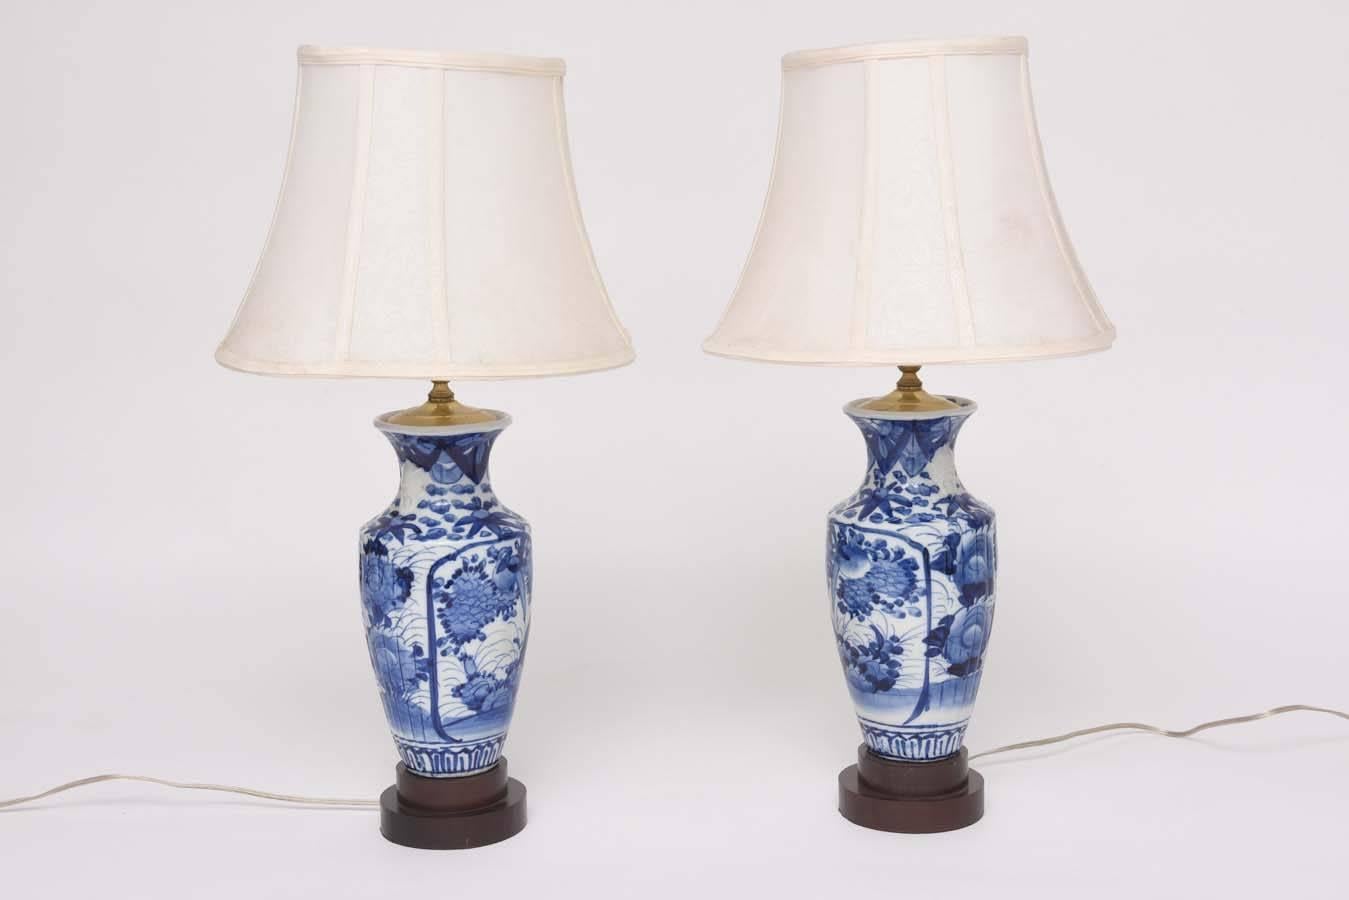 Porcelain Pair of 19th Century Blue and White Chinese Export Vases Mounted as Lamps